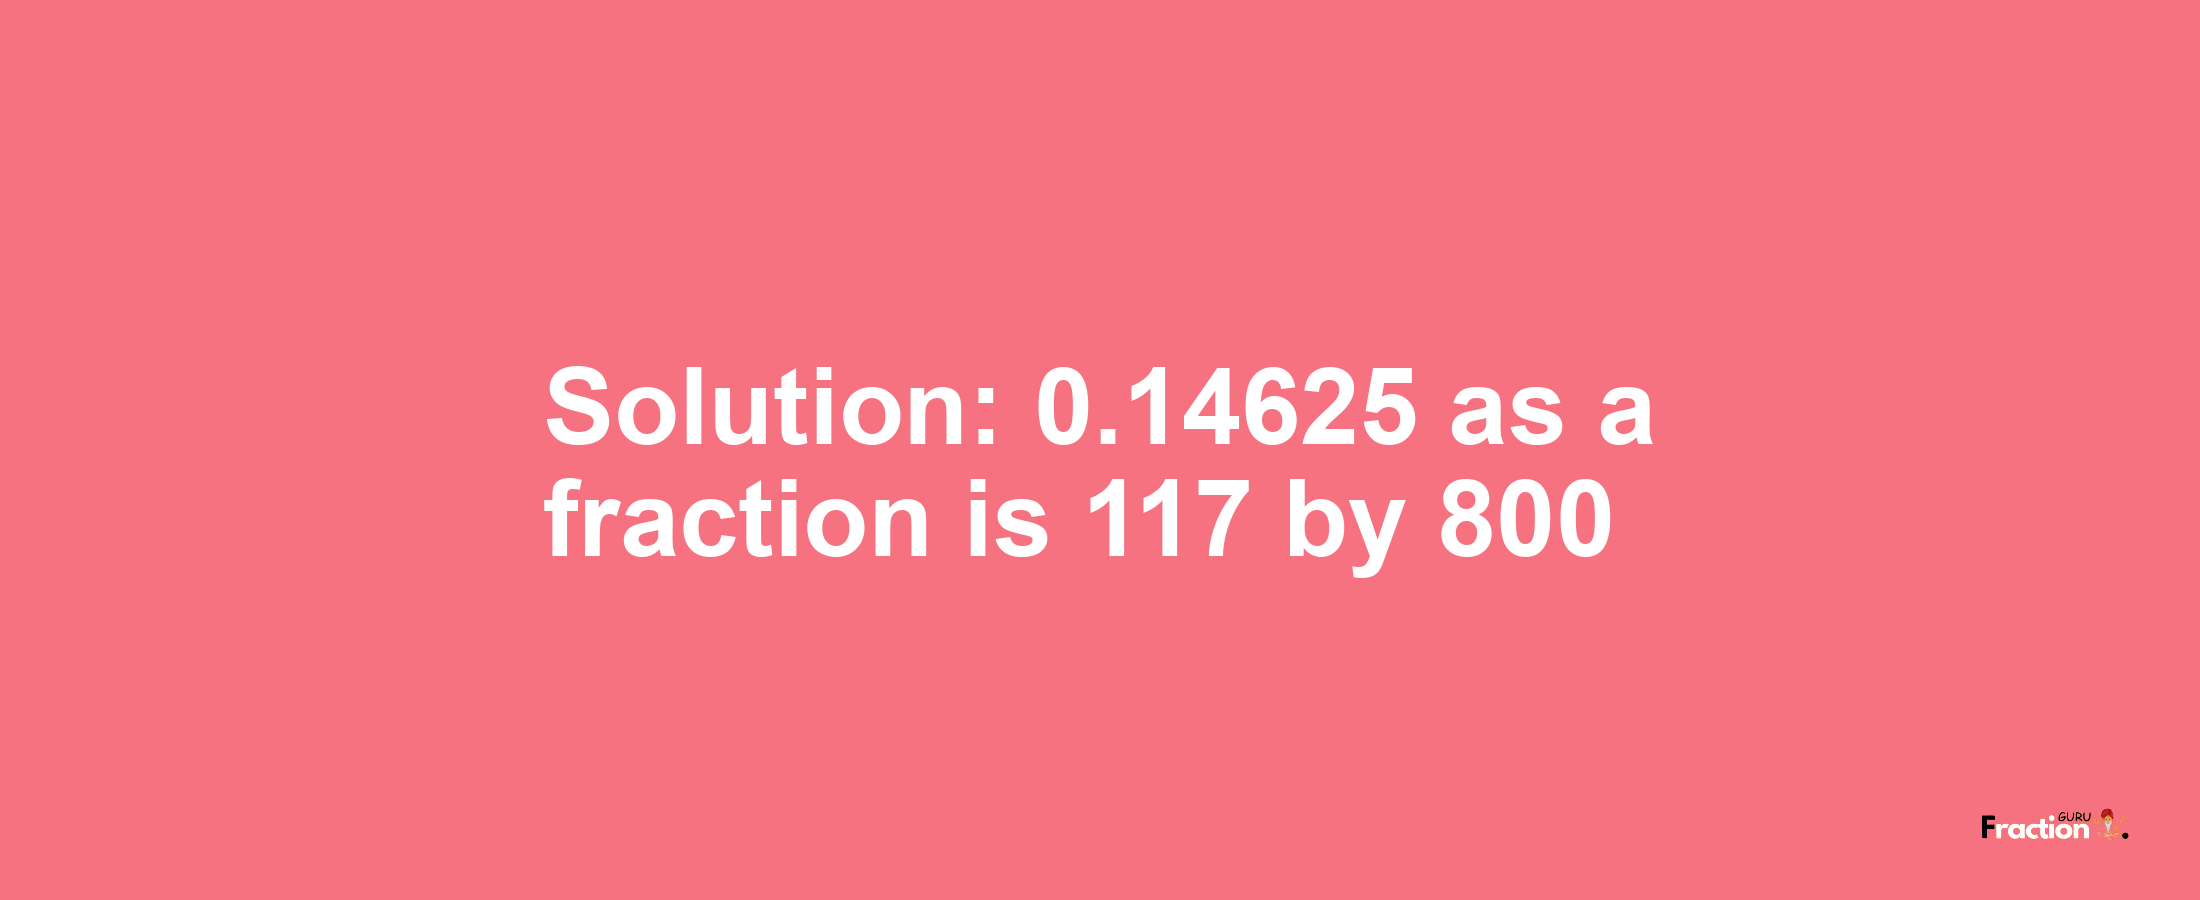 Solution:0.14625 as a fraction is 117/800